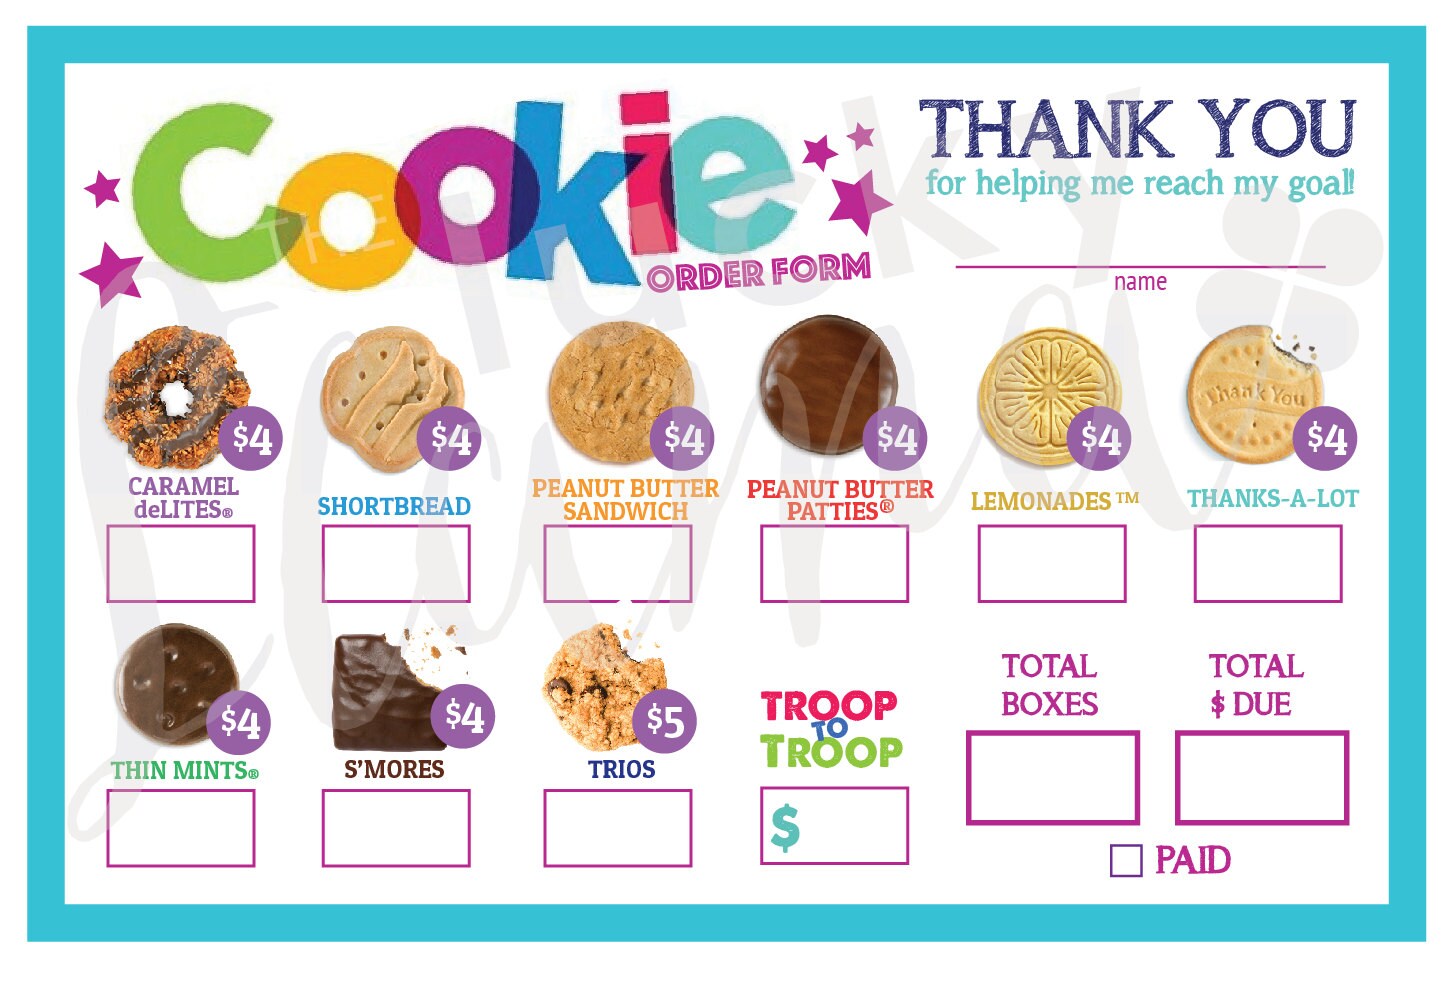 printable-order-form-for-girl-scout-cookies-printable-forms-free-online